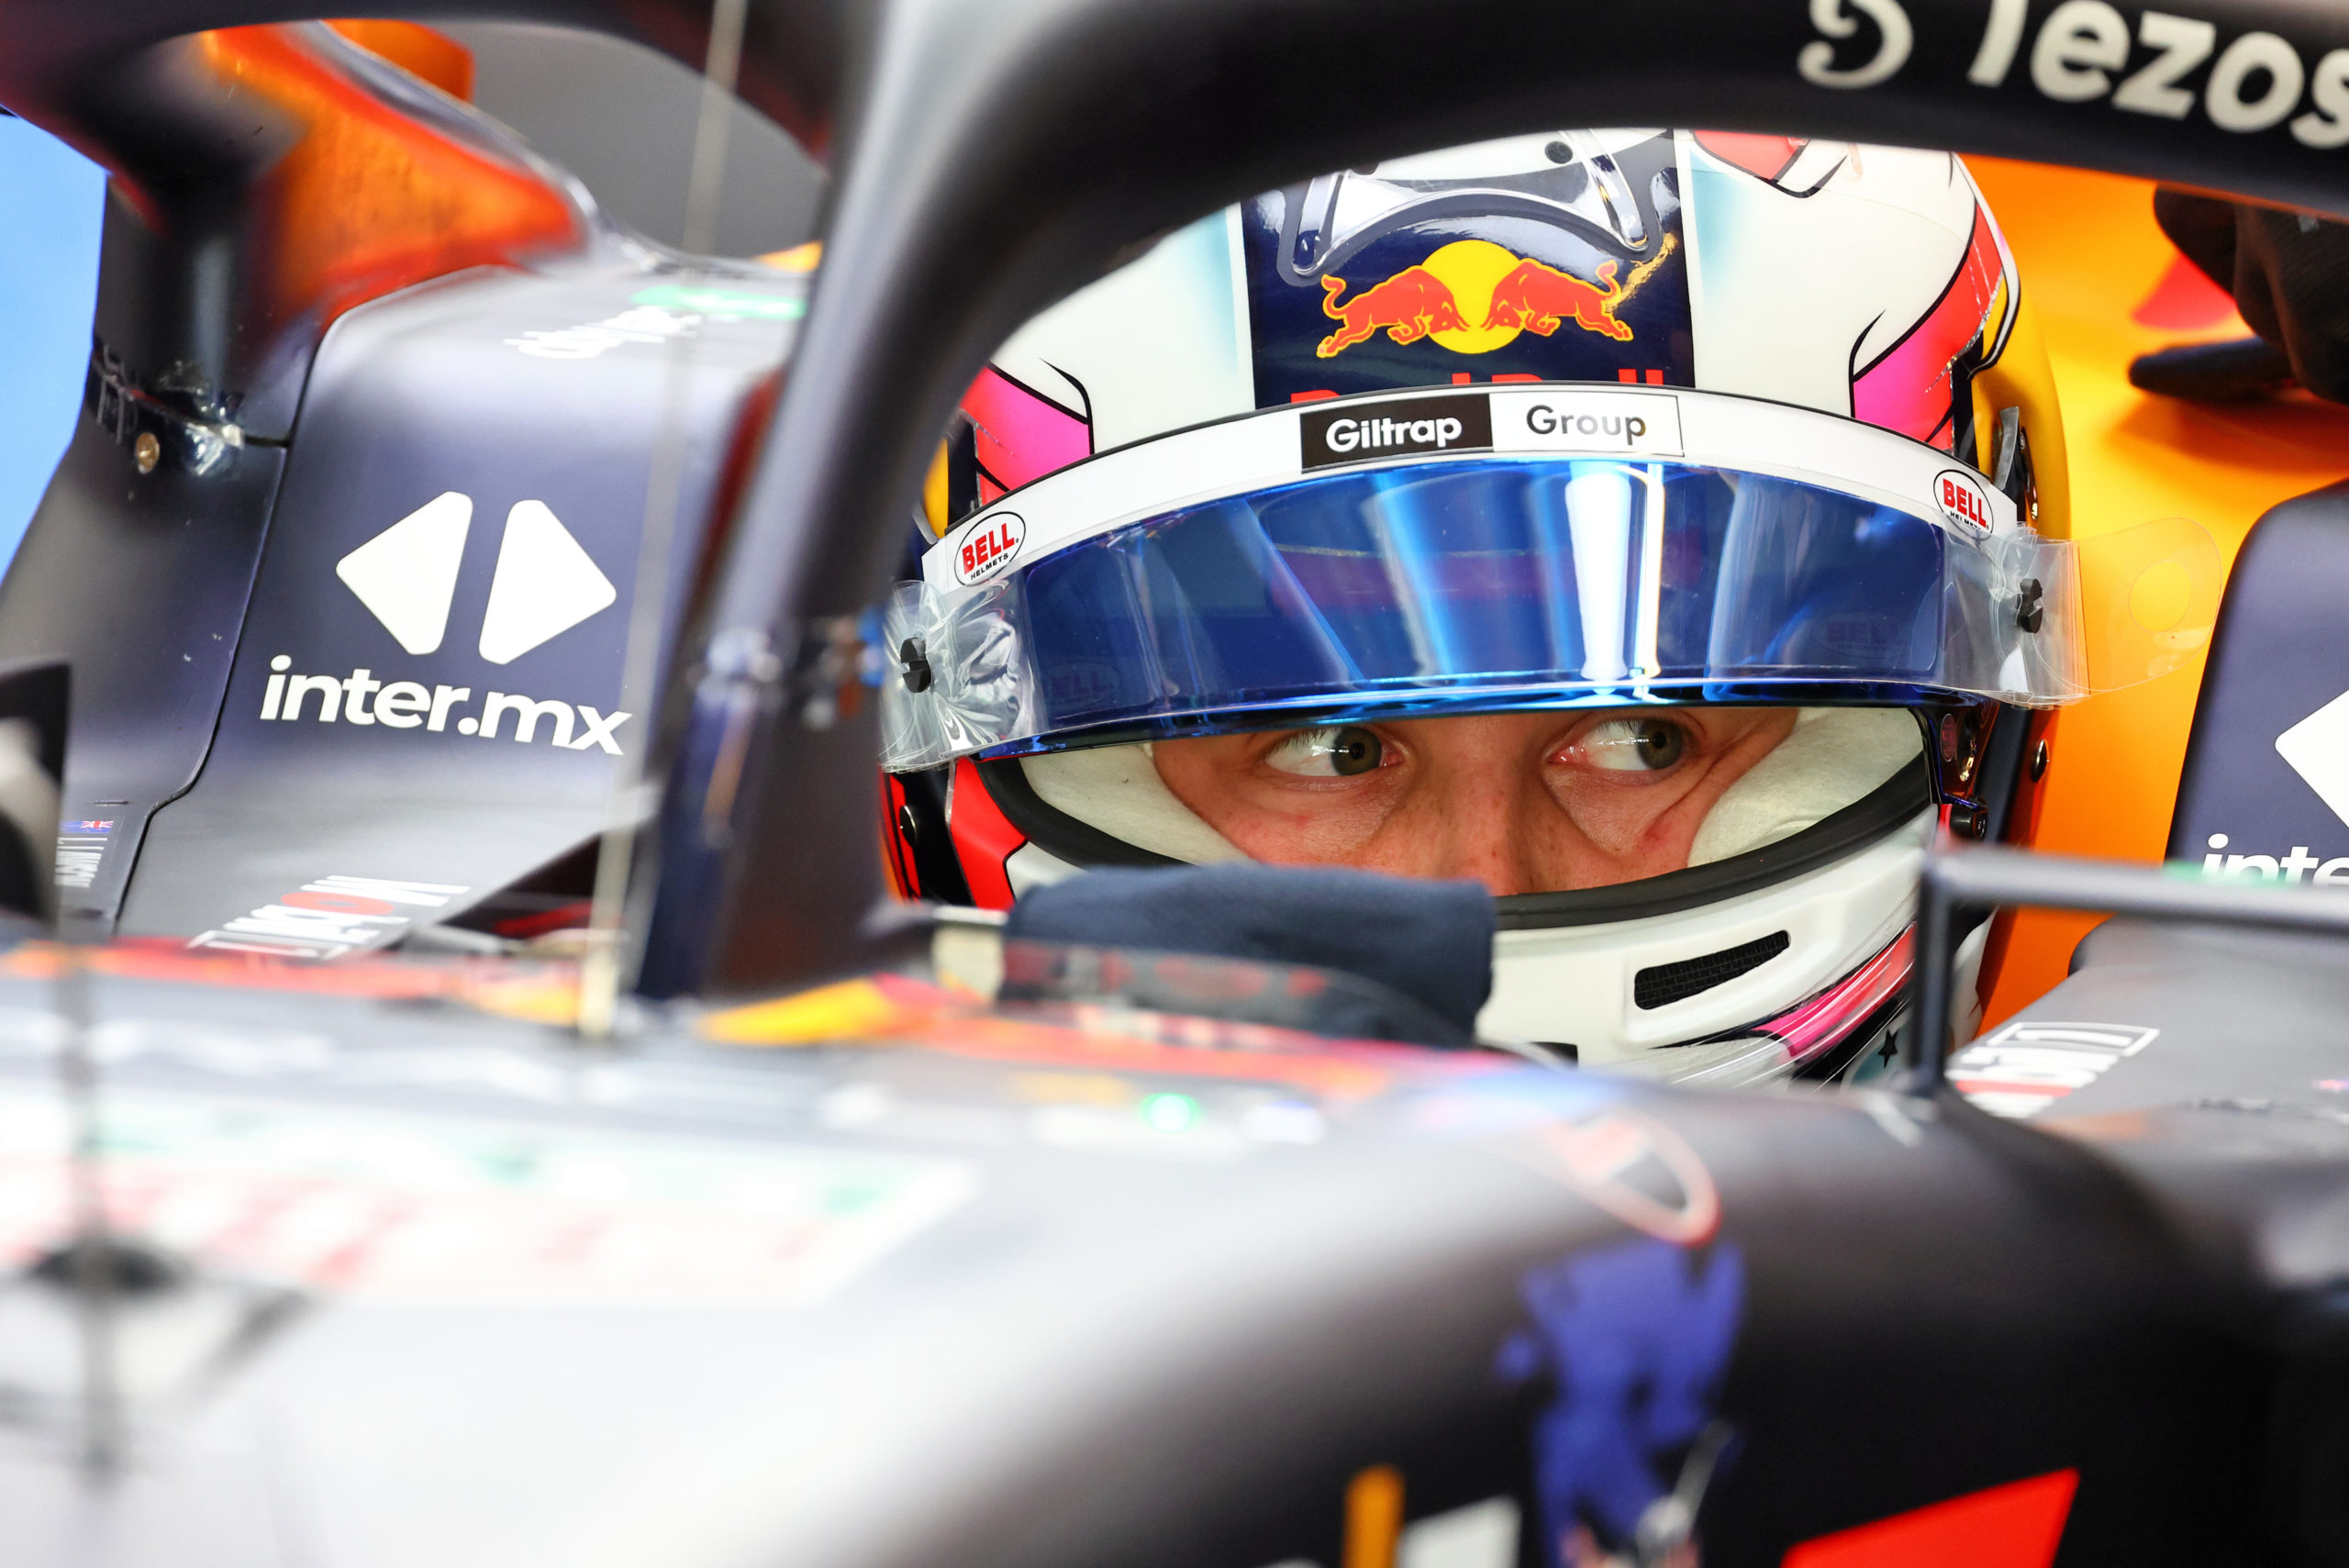 ricciardo’s replacement has a big task but a bigger opportunity